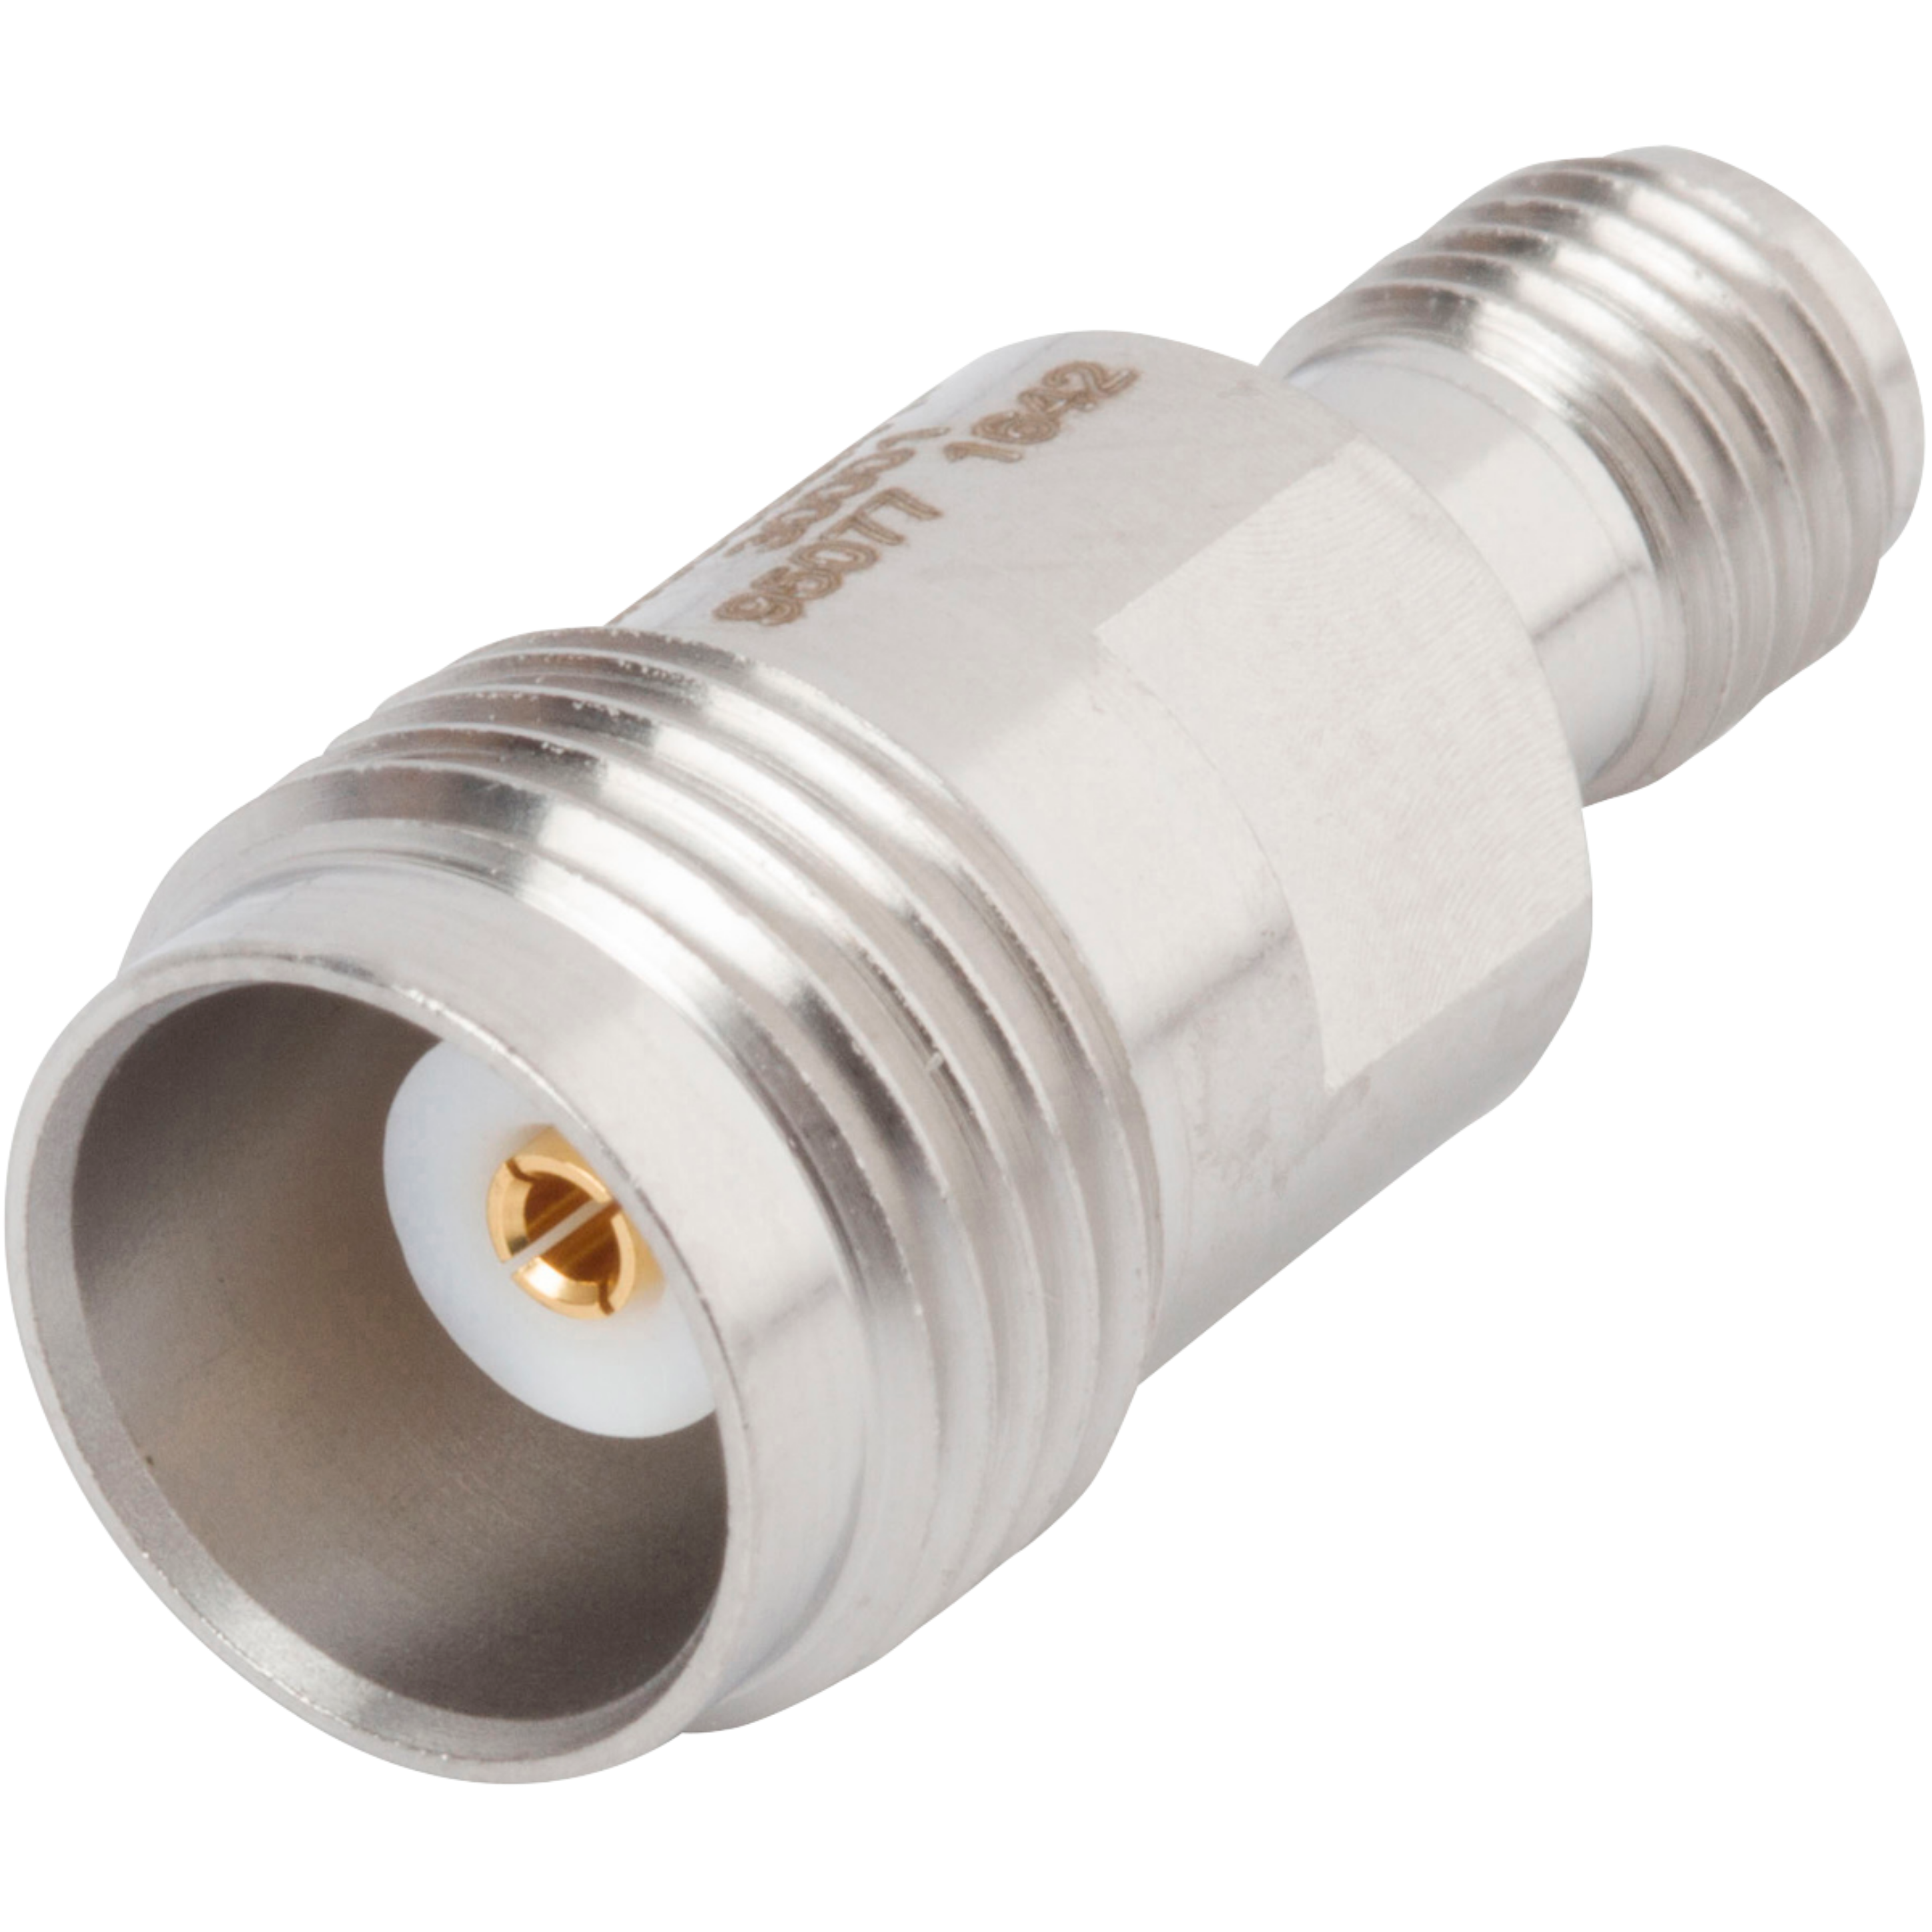 Picture of PTNC Female to SMA Female Adapter